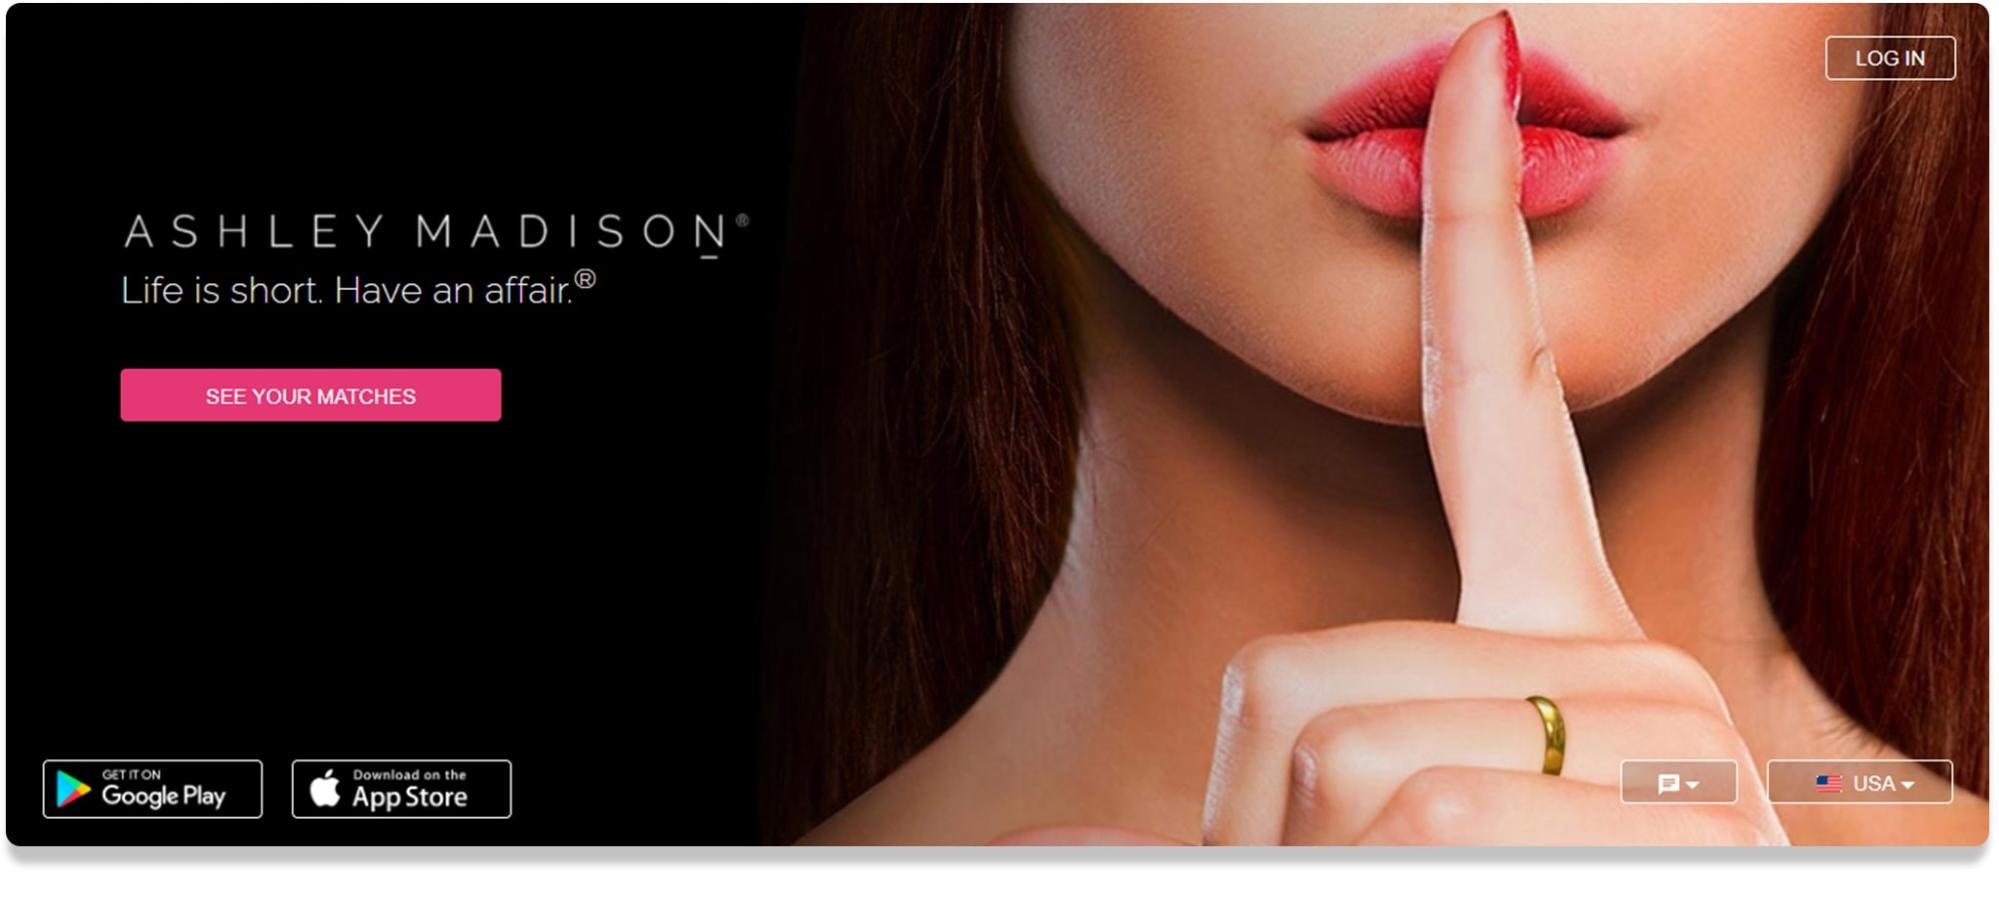 Another date for Ashley Madison?